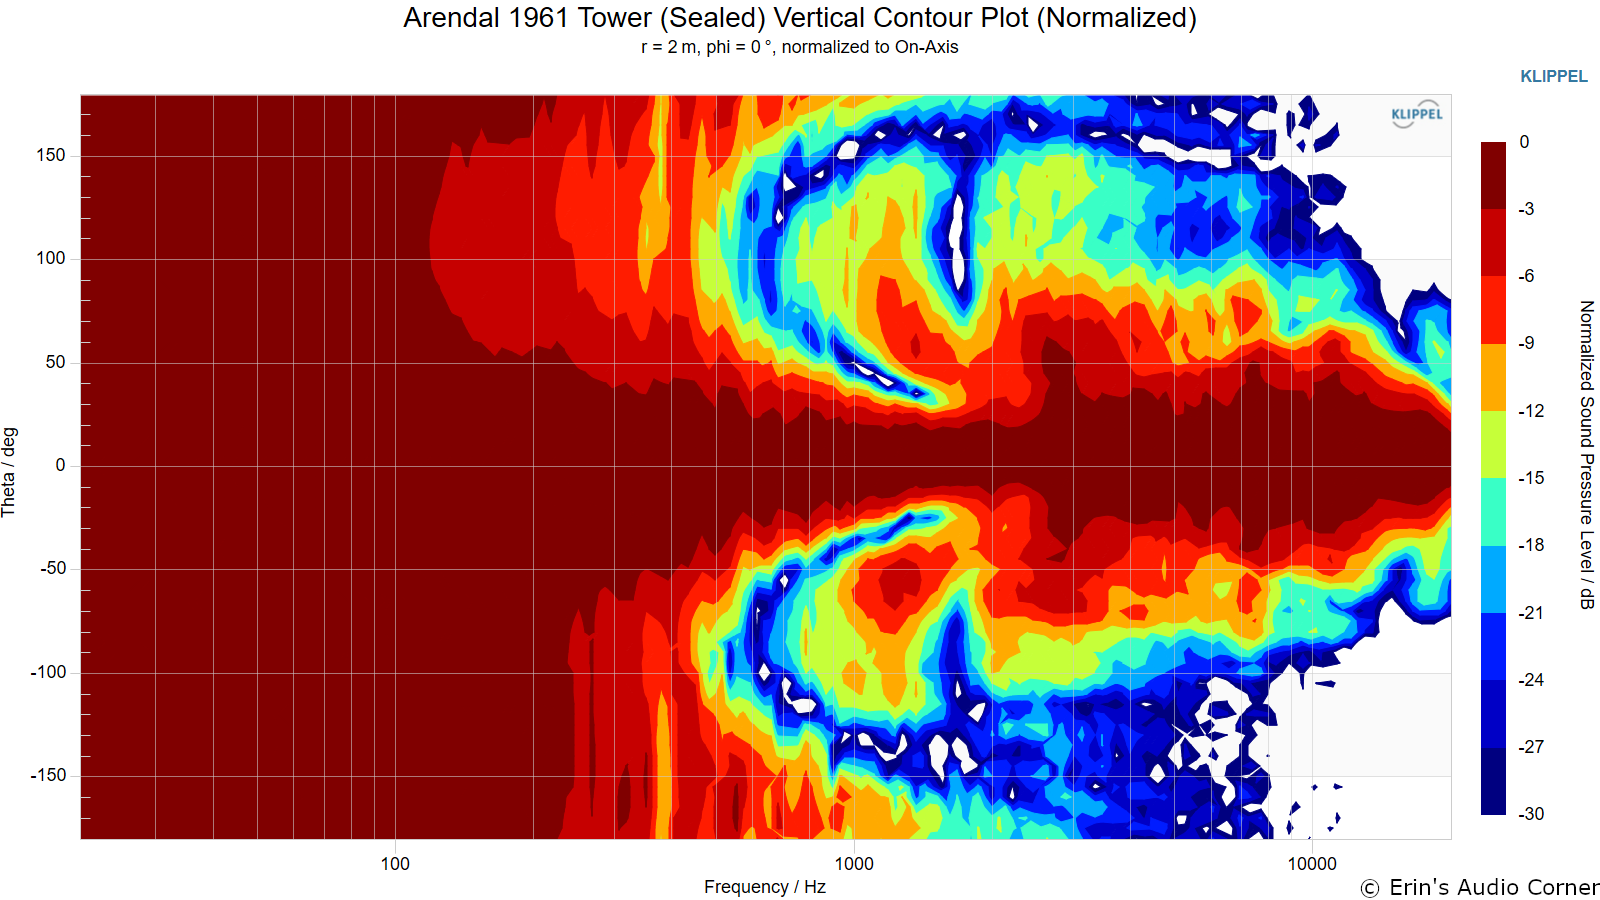 Arendal 1961 Tower (Sealed) Vertical Contour Plot (Normalized).png